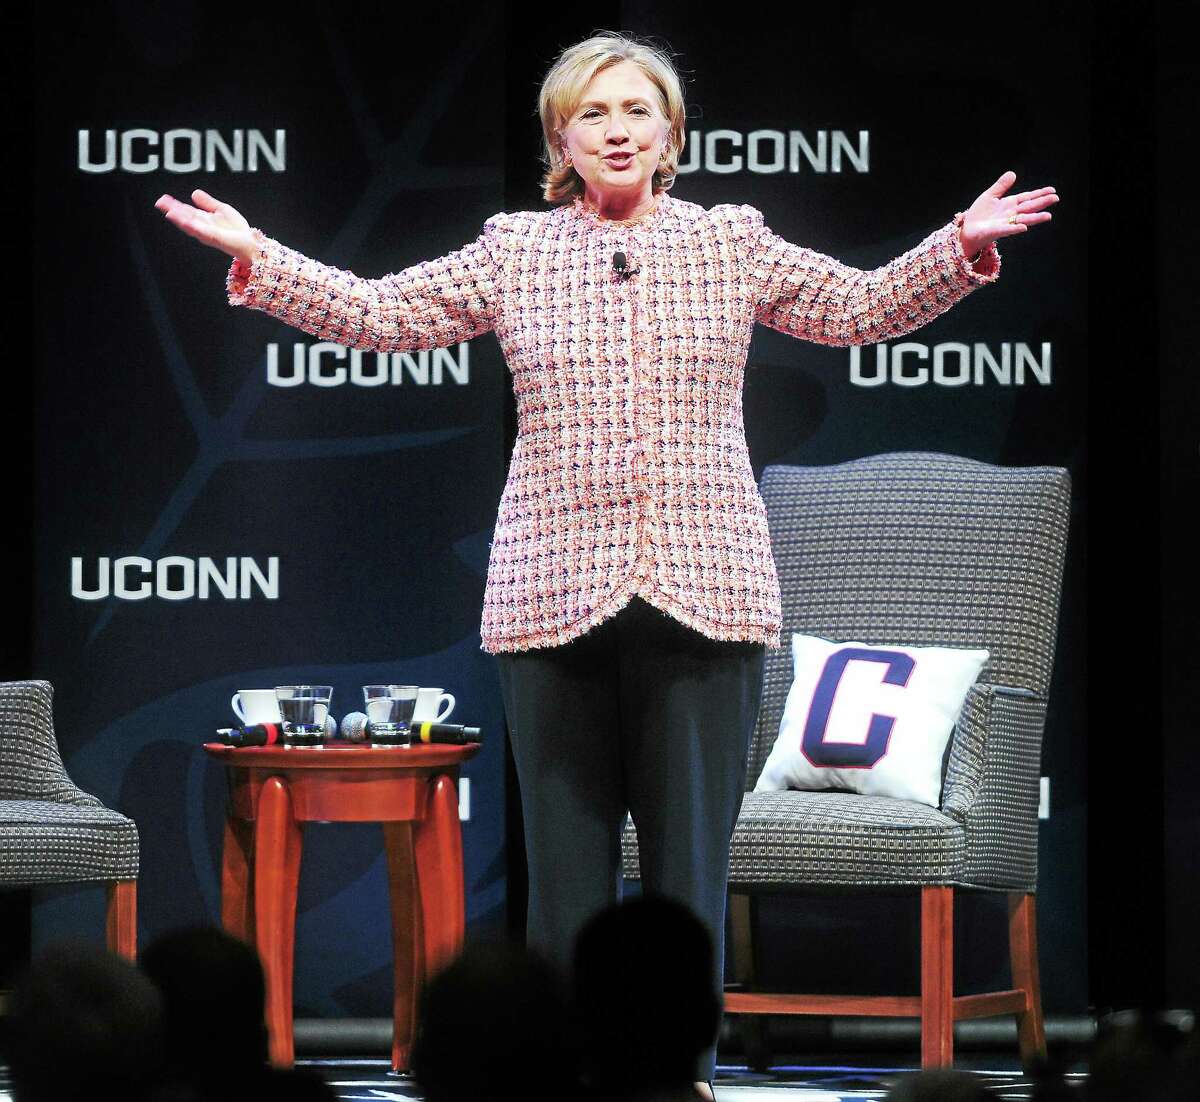 In this April 23, 2014 file photo, former Secretary of State Hillary Clinton speaks at the Edmund Fusco Contemporary Issues Forum at the University of Connecticut